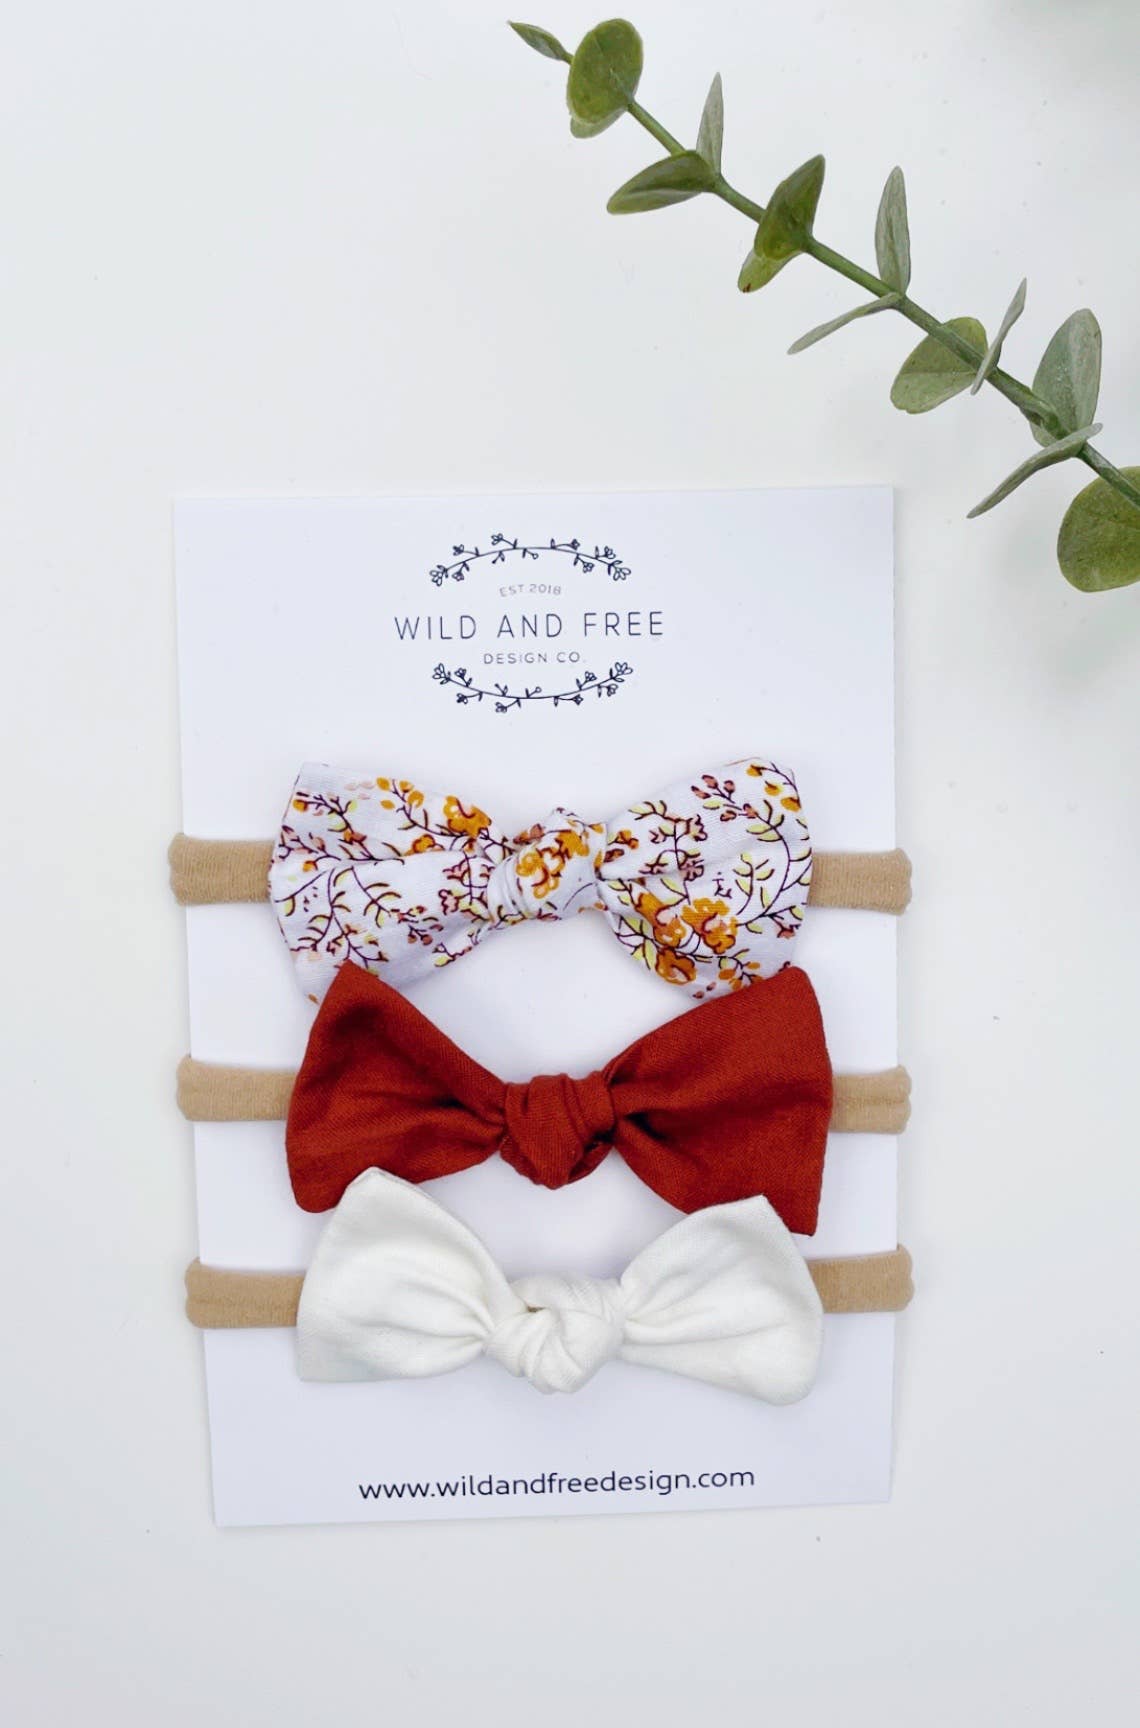 Wild and Free Design Co. - Harvest Knotted Bow Set